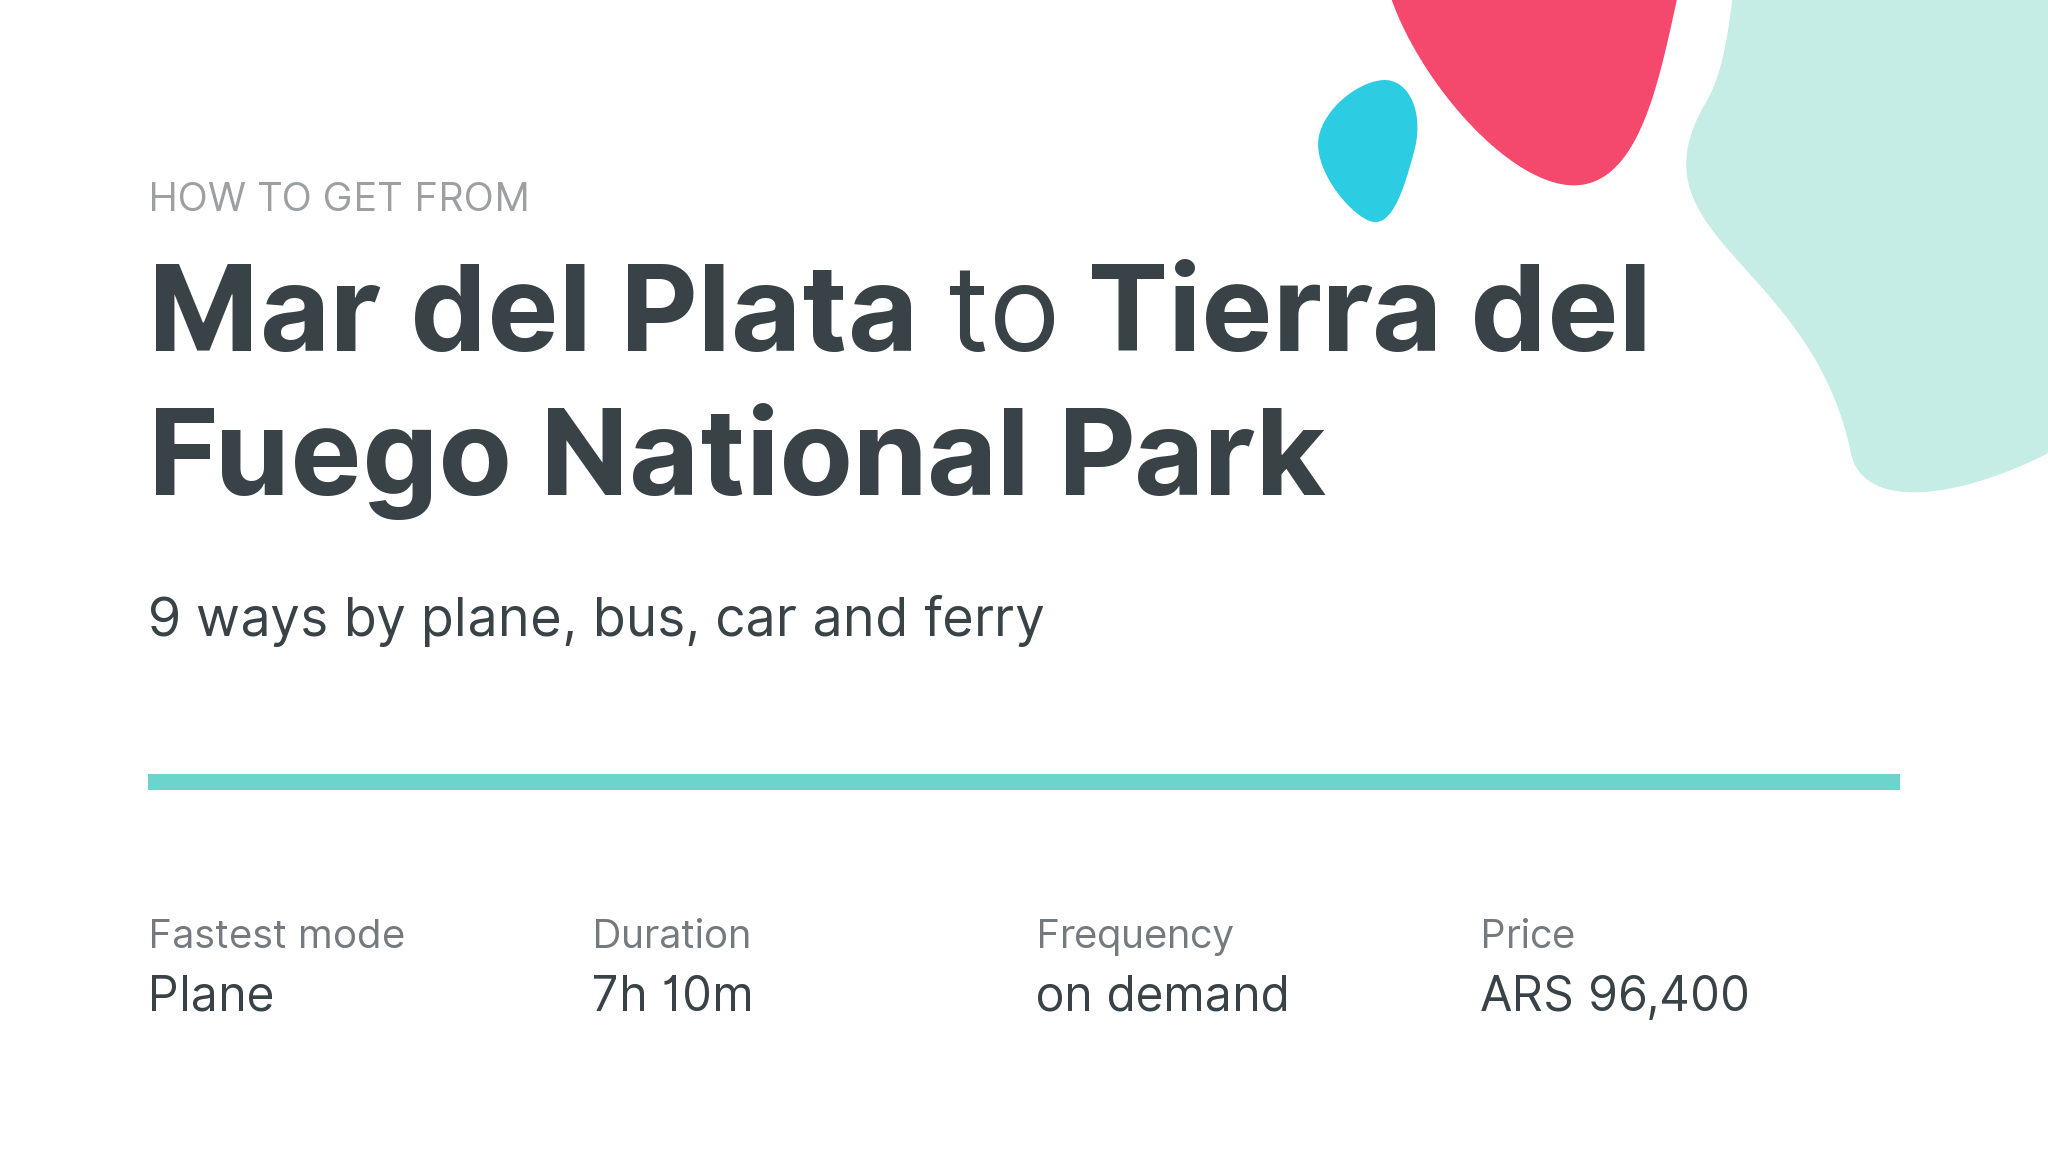 How do I get from Mar del Plata to Tierra del Fuego National Park